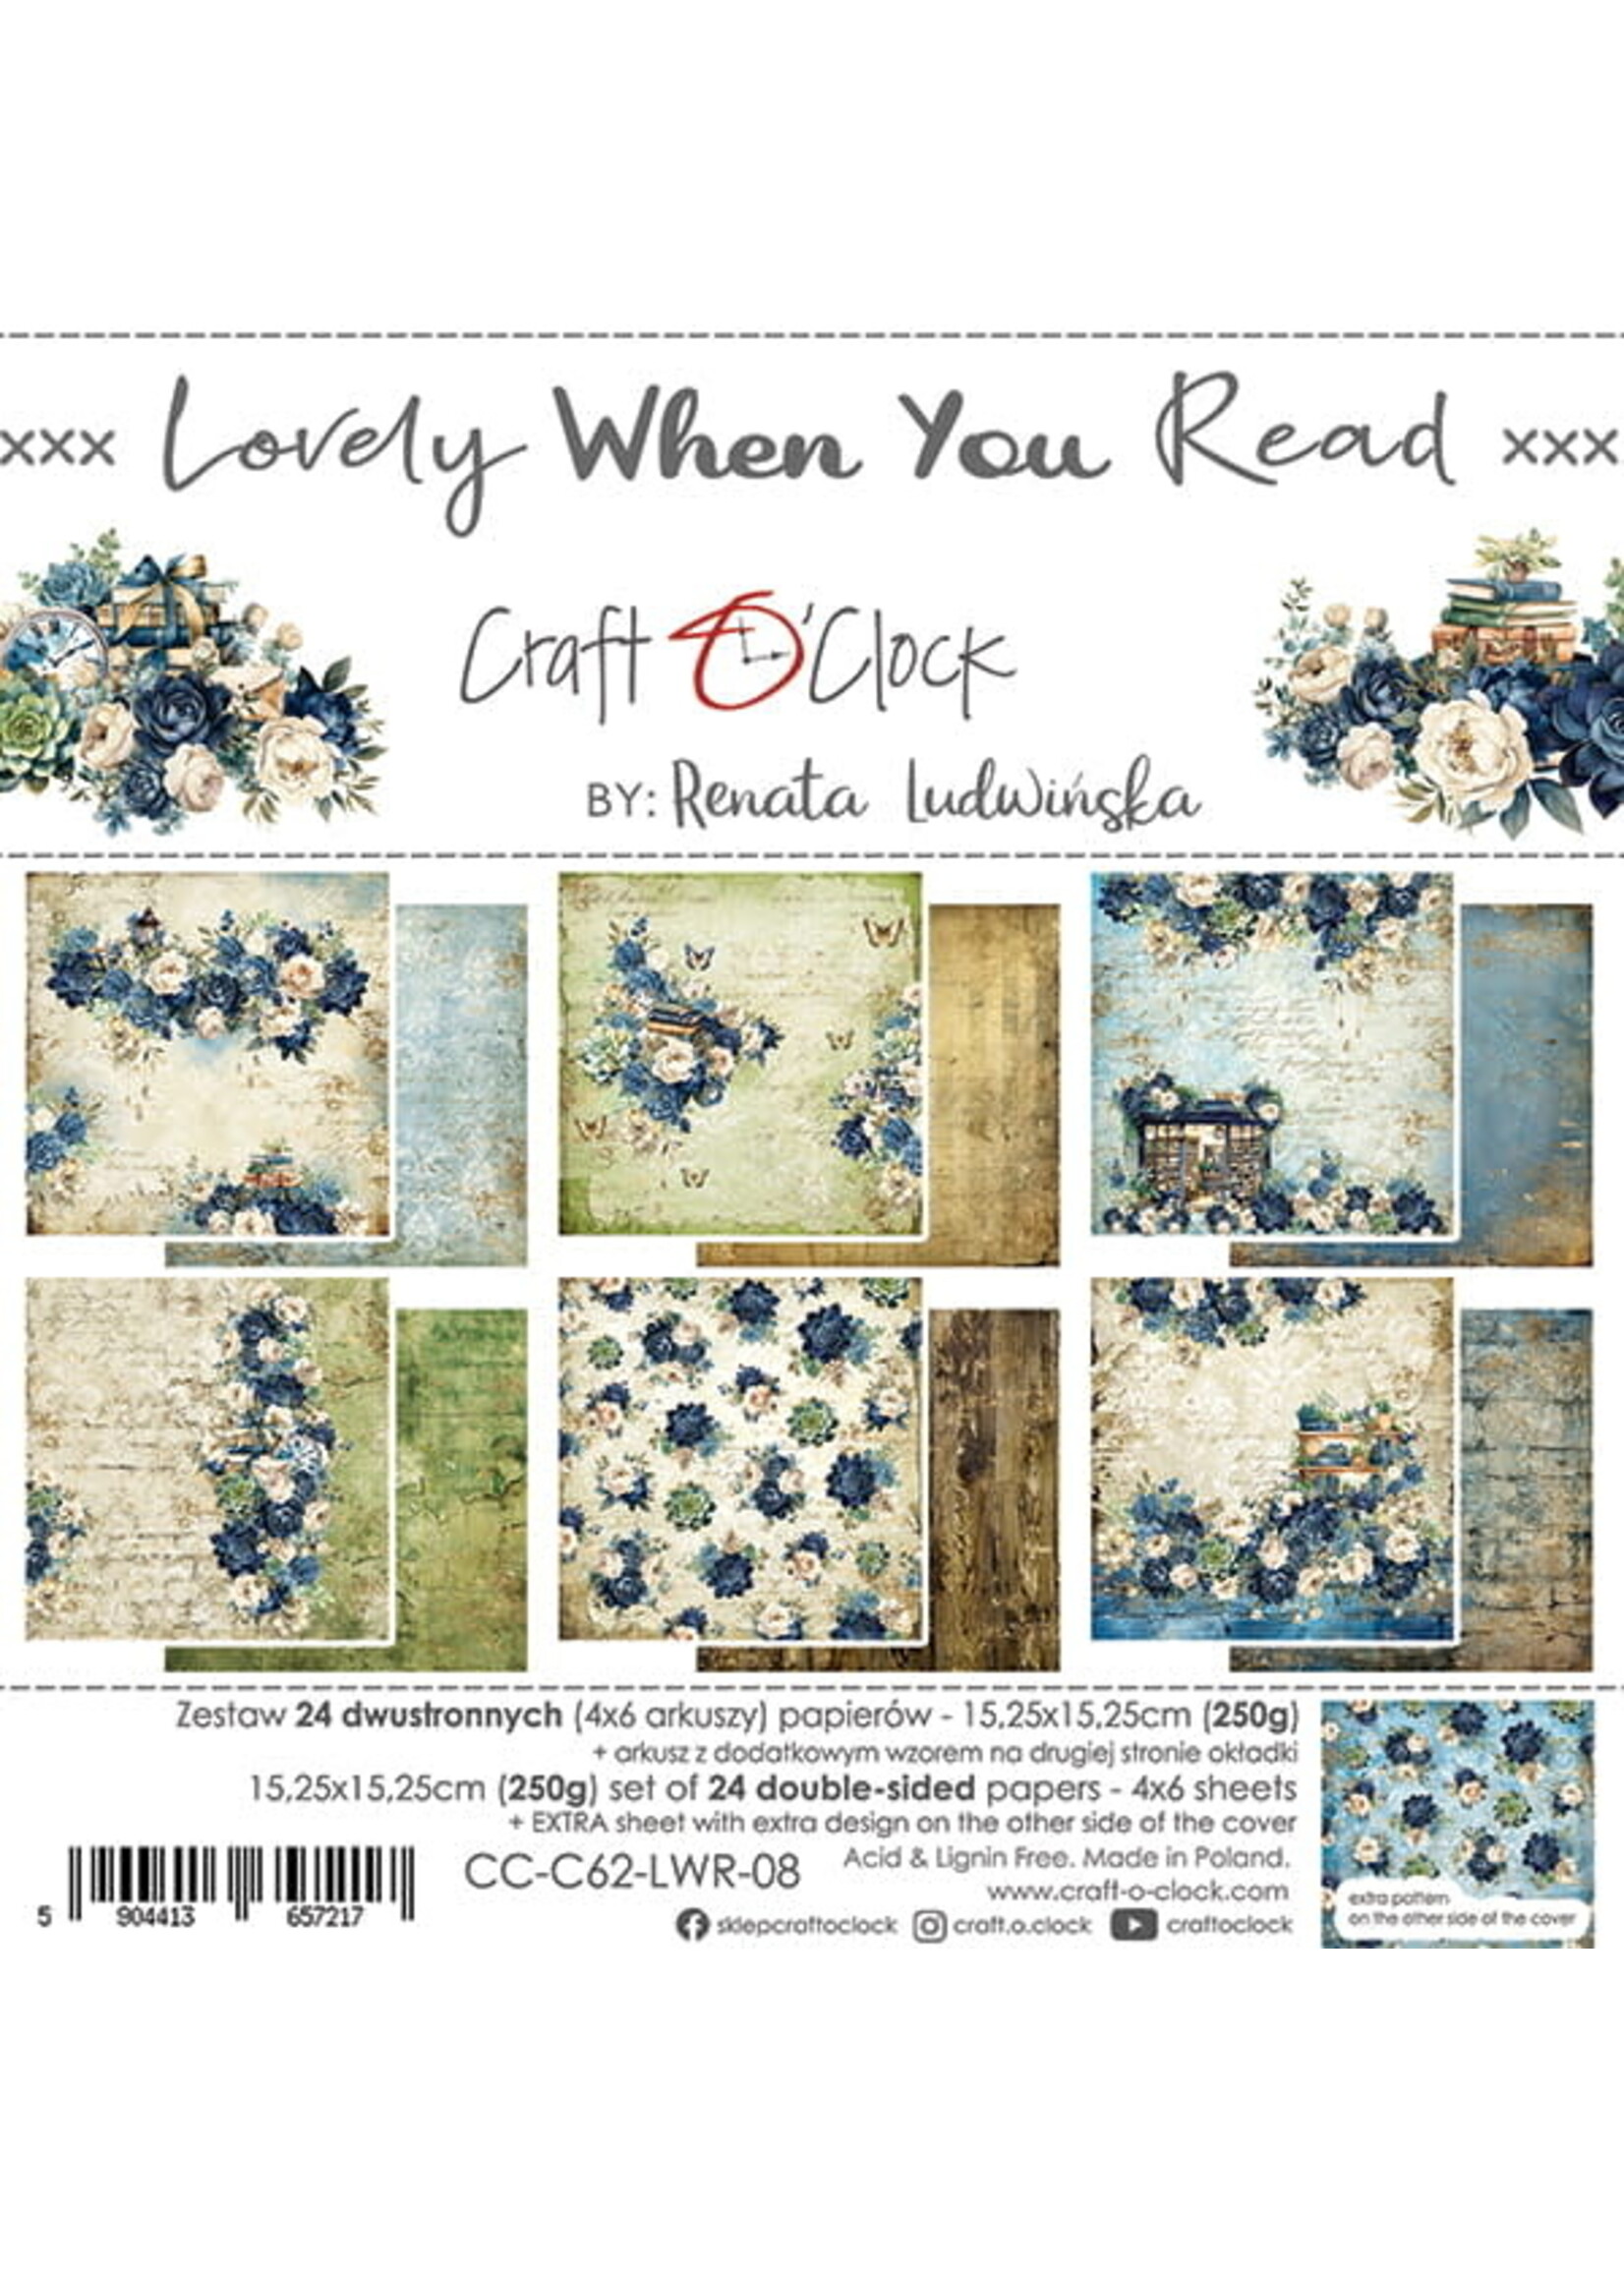 Craft O Clock LOVELY WHEN YOU READ - A SET OF PAPERS 15,25X15,25CM